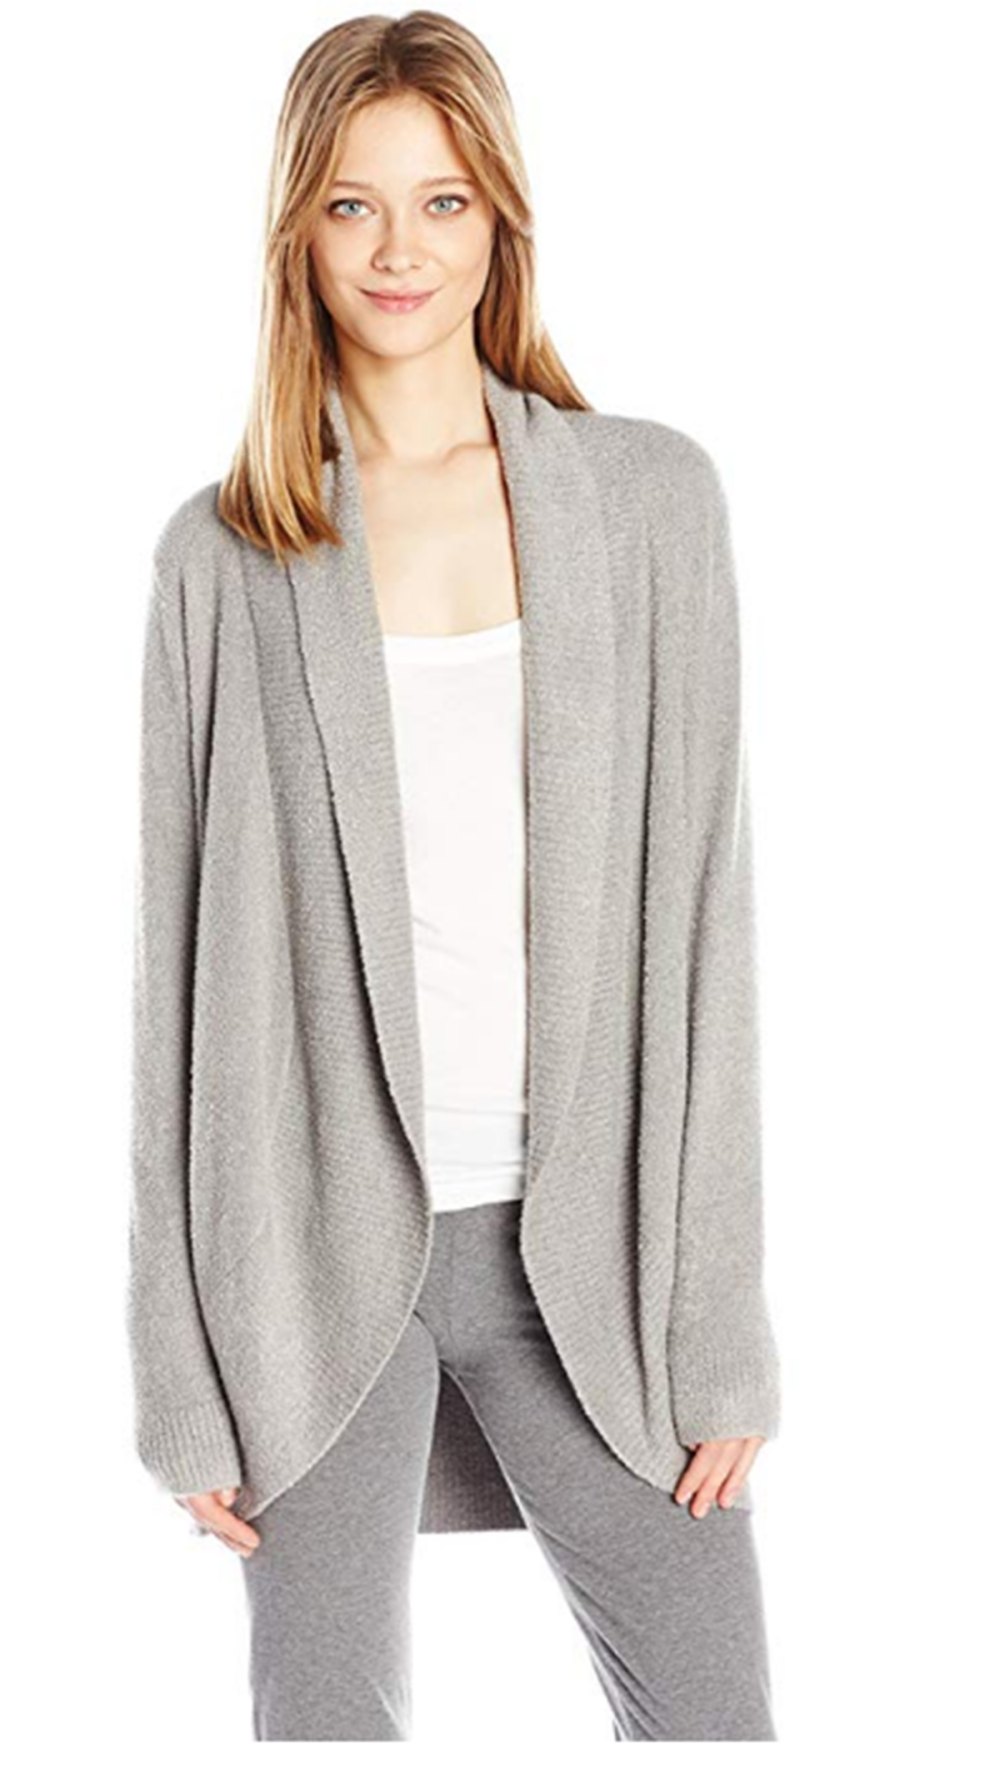 Best Sweater on Amazon: This Top-Reviewed Cardigan Is Dreamy & Cozy ...